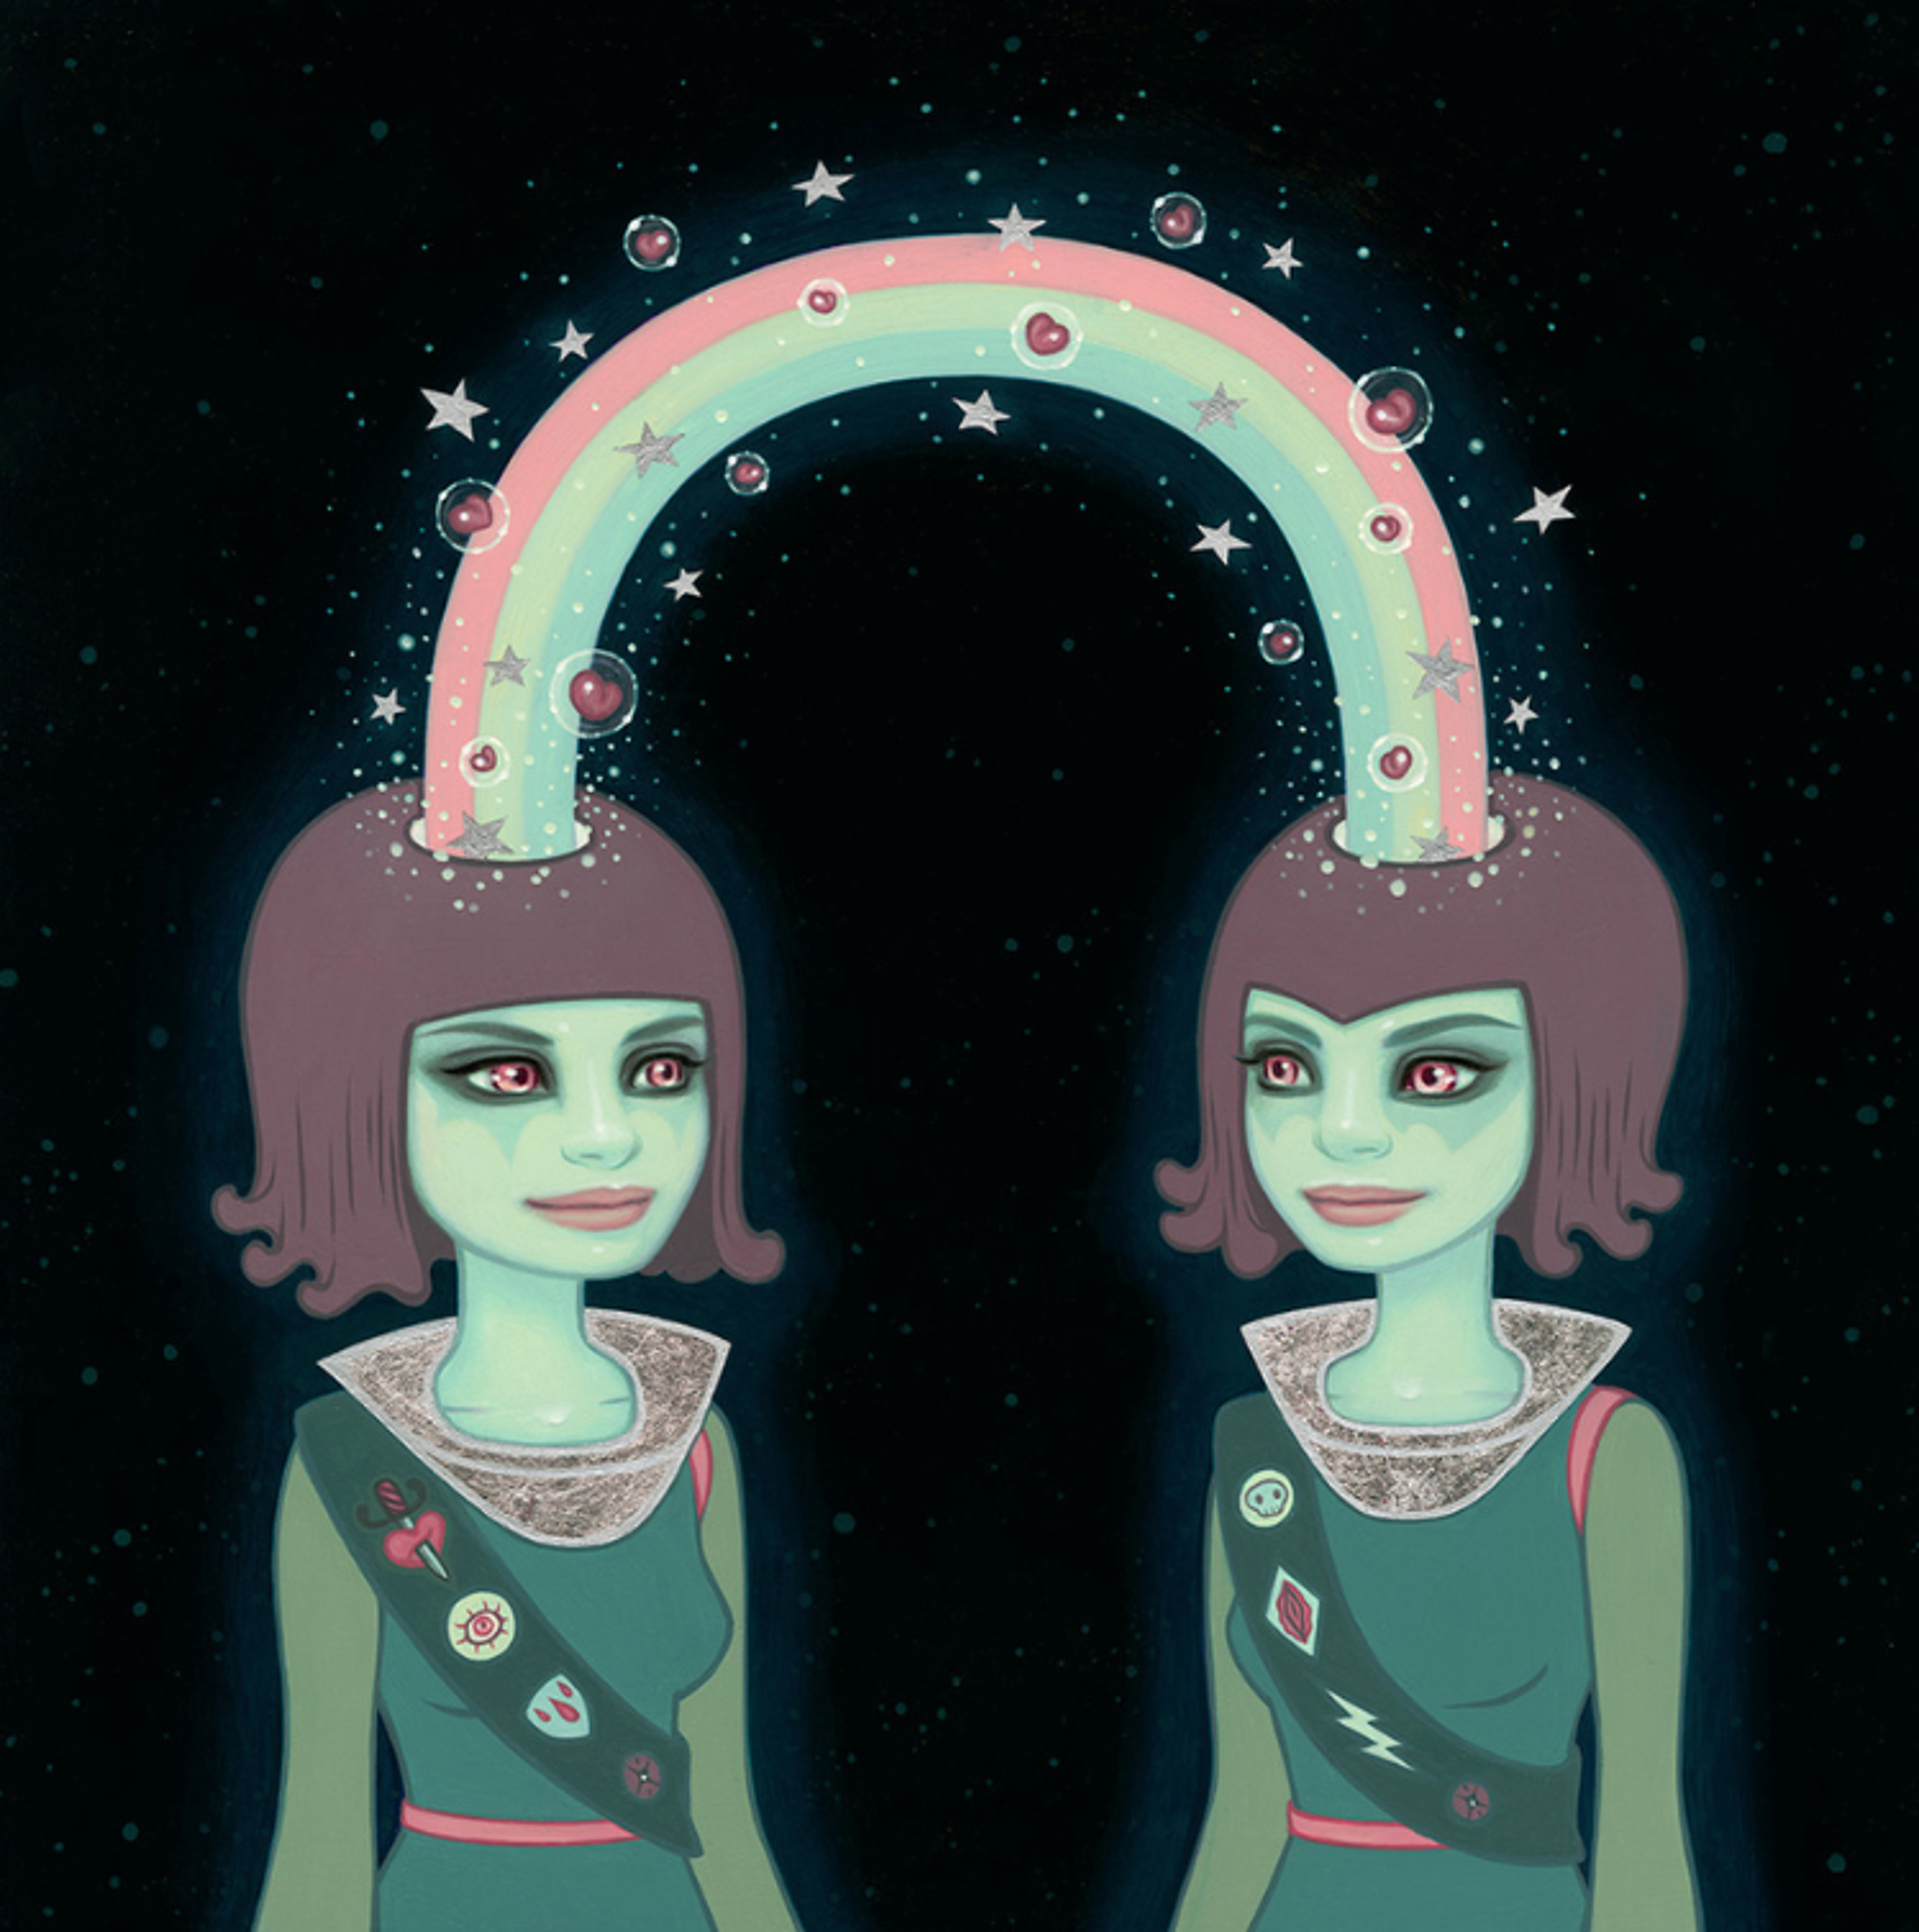 The Indestructible Energy Of Synchronicity In The Space Continuum (73/100) by Tara McPherson